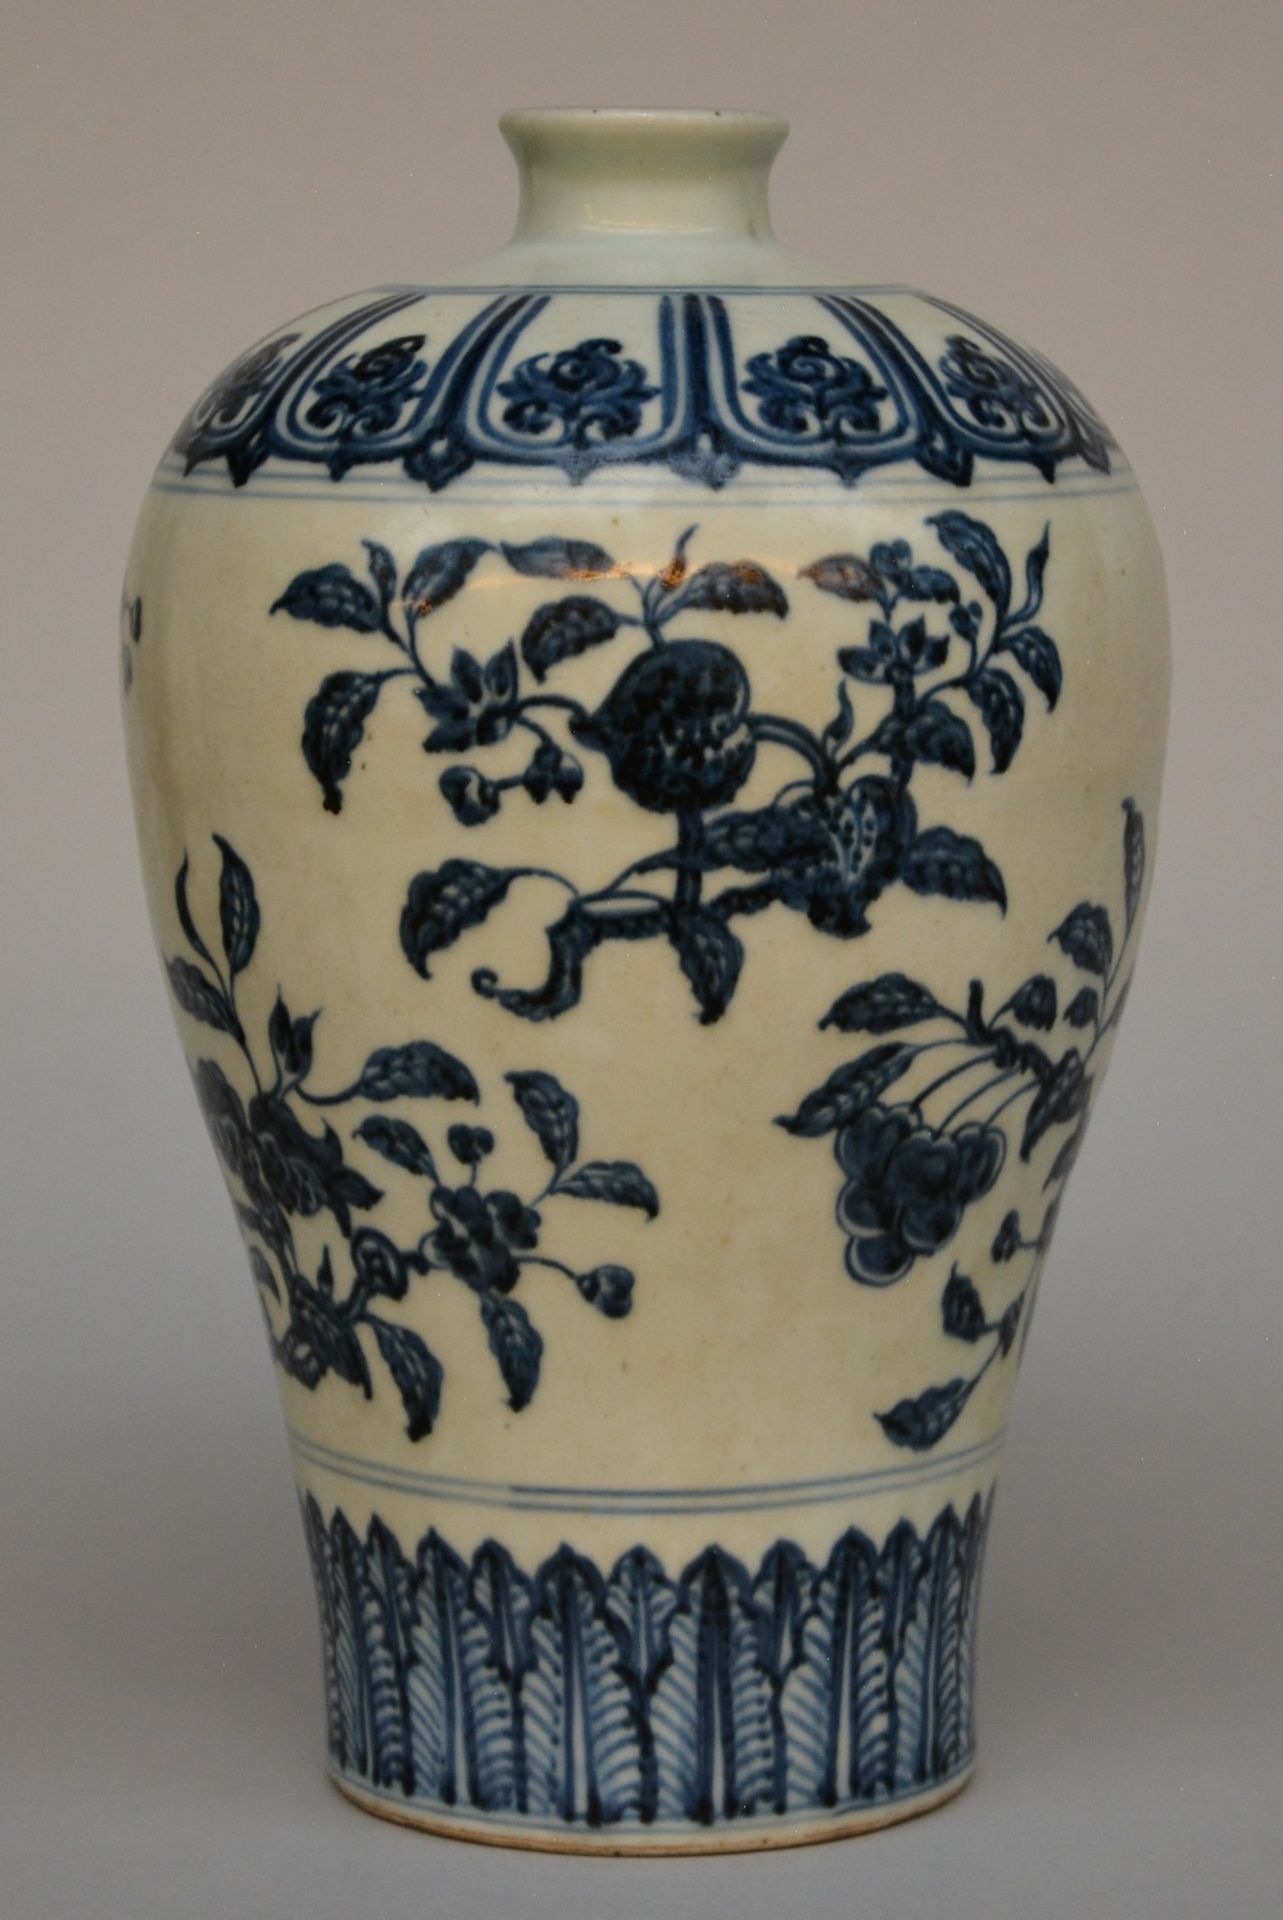 A Chinese blue and white decorated Meiping vase with floral decoration, probably 17thC, H 28,5 cm (